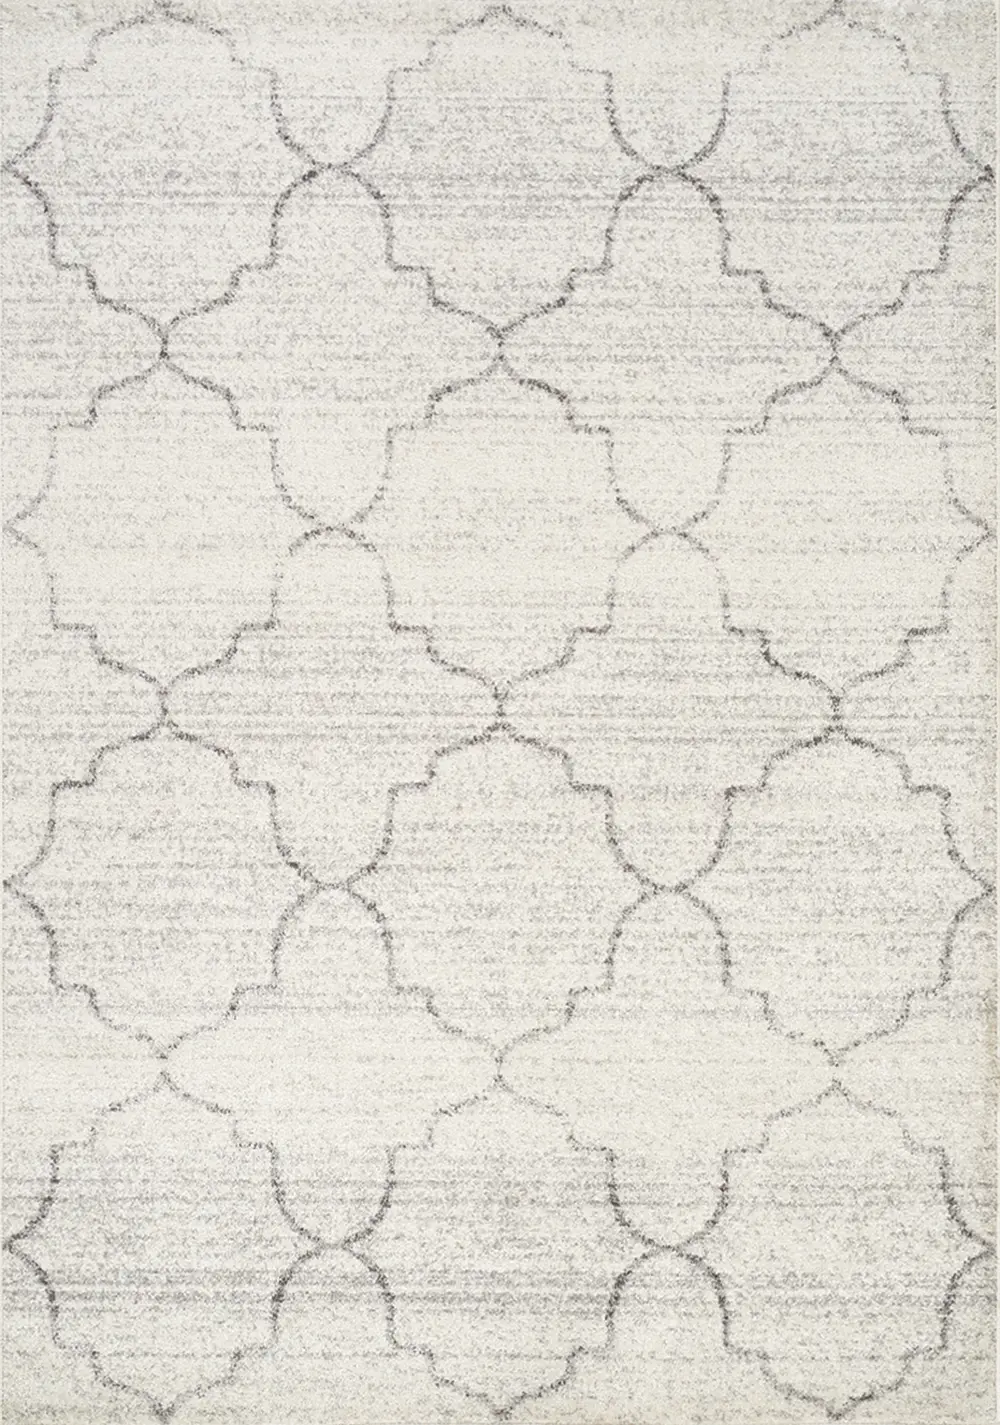 5 x 8 Medium Ogee White and Gray Area Rug - Focus-1